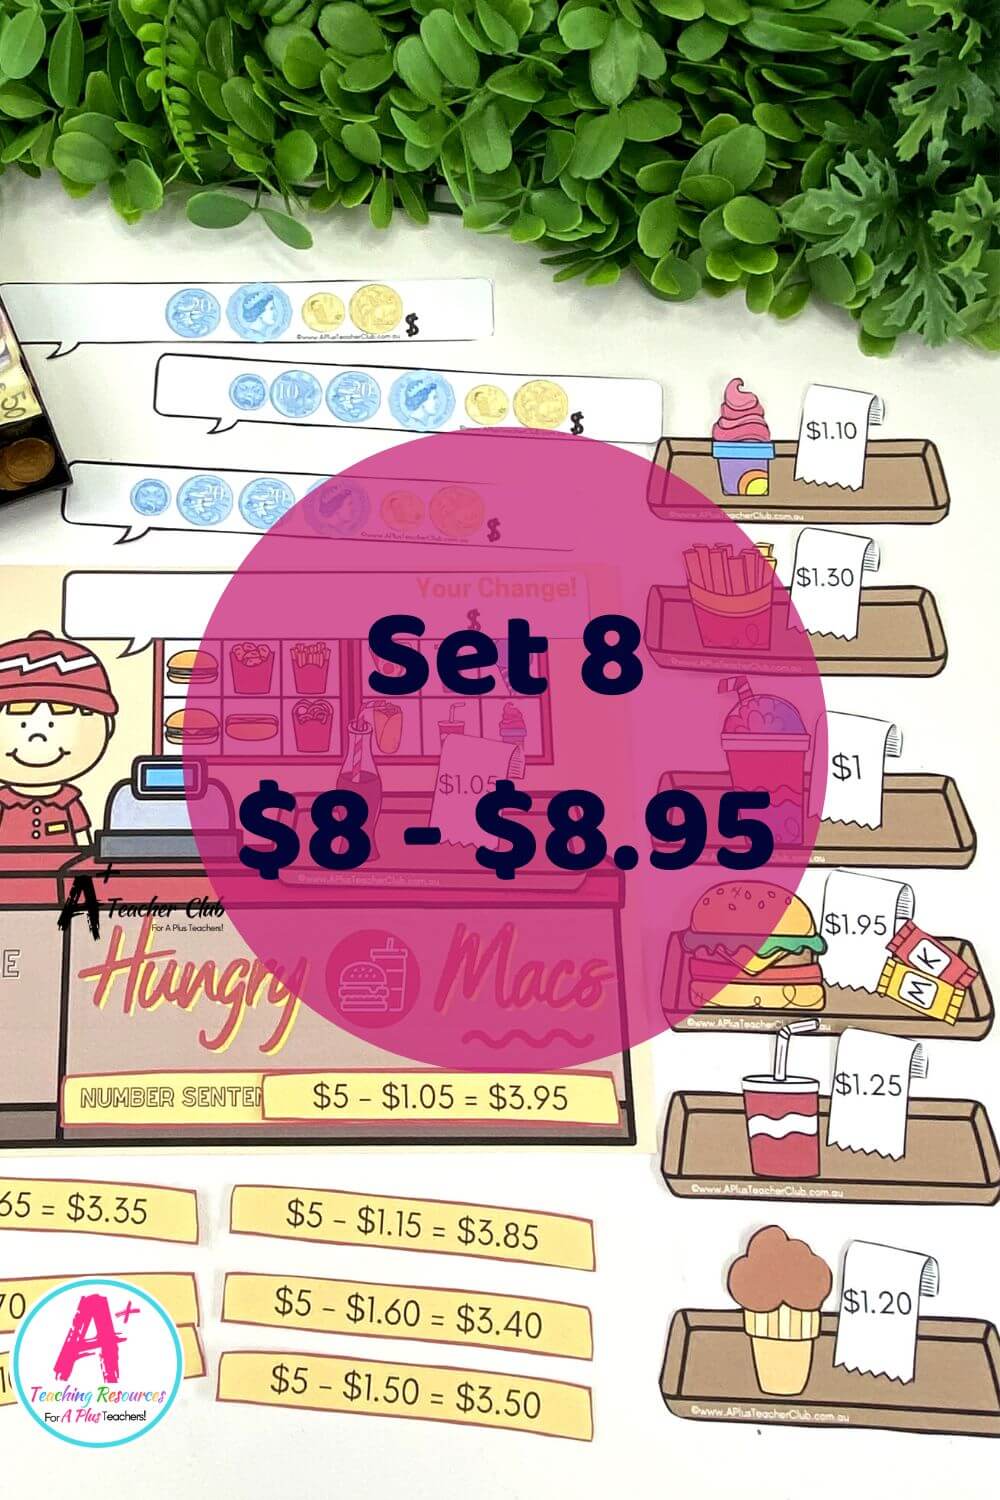 Counting Change Games - Fast Food Set 8 ($8-$8.95)